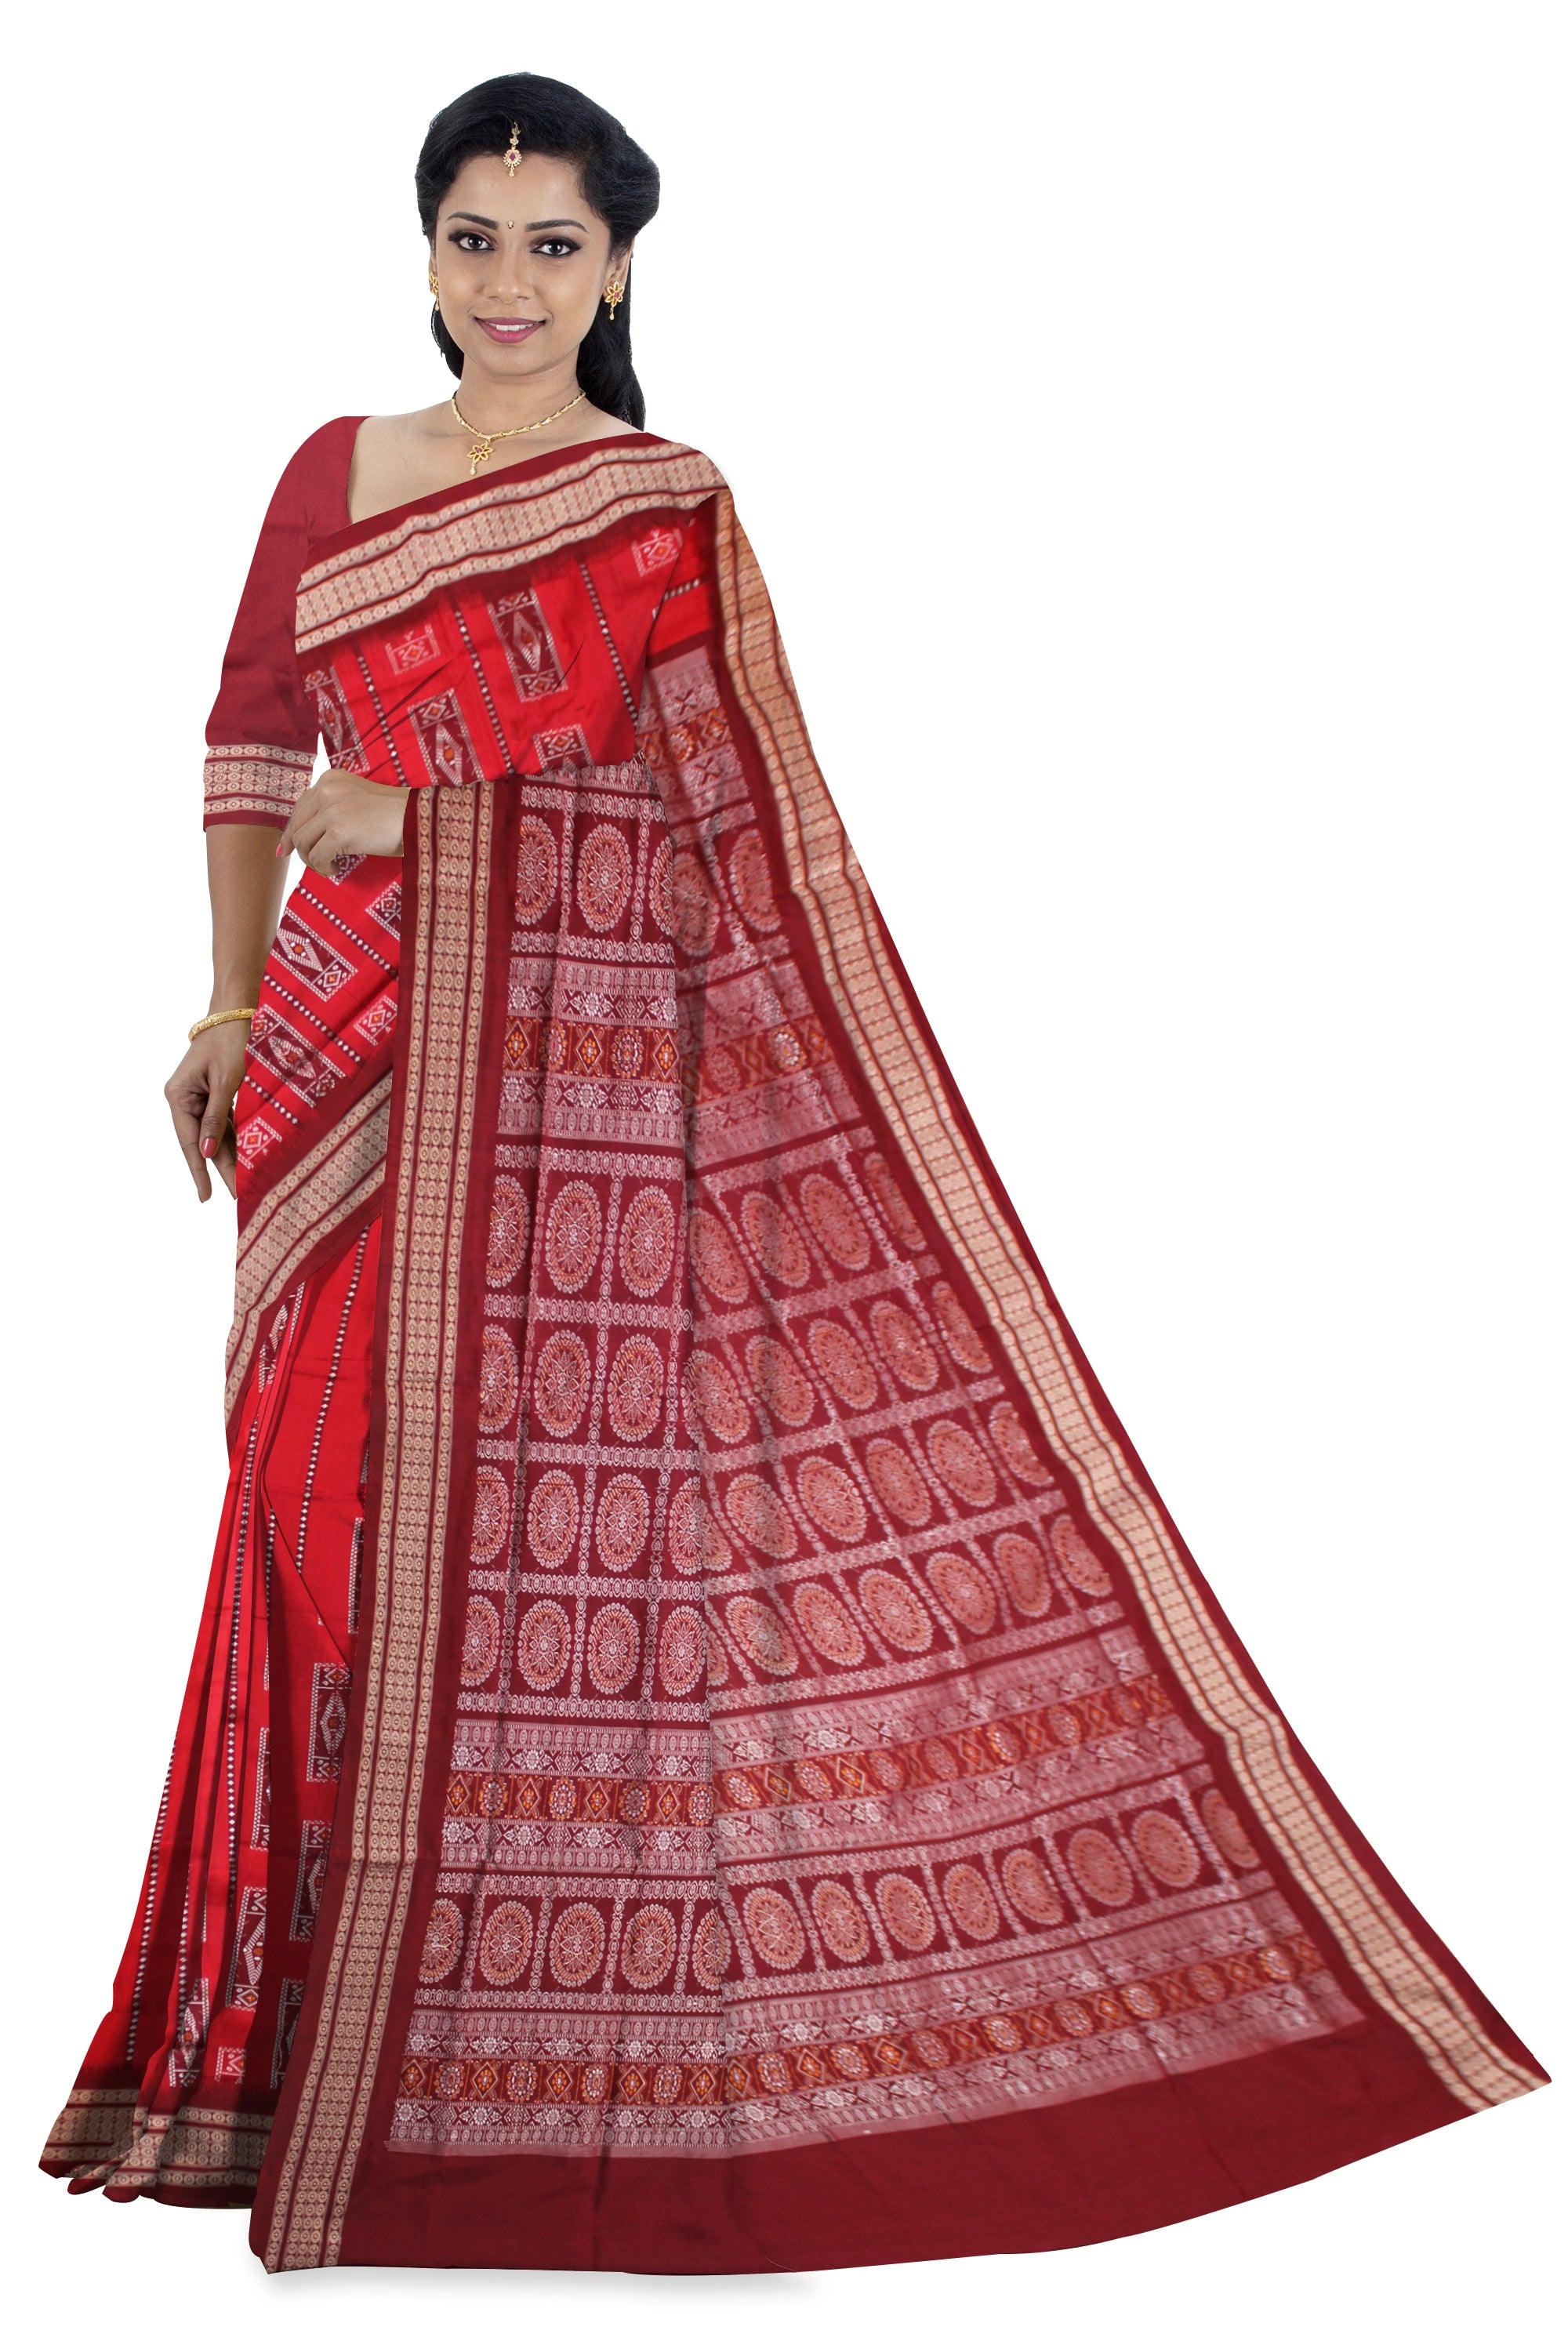 NEW DESIGN BANDHA SAREE IN RED AND MAROON COLOR MIX PATA, WITH BLOUSE PIECE - Koshali Arts & Crafts Enterprise